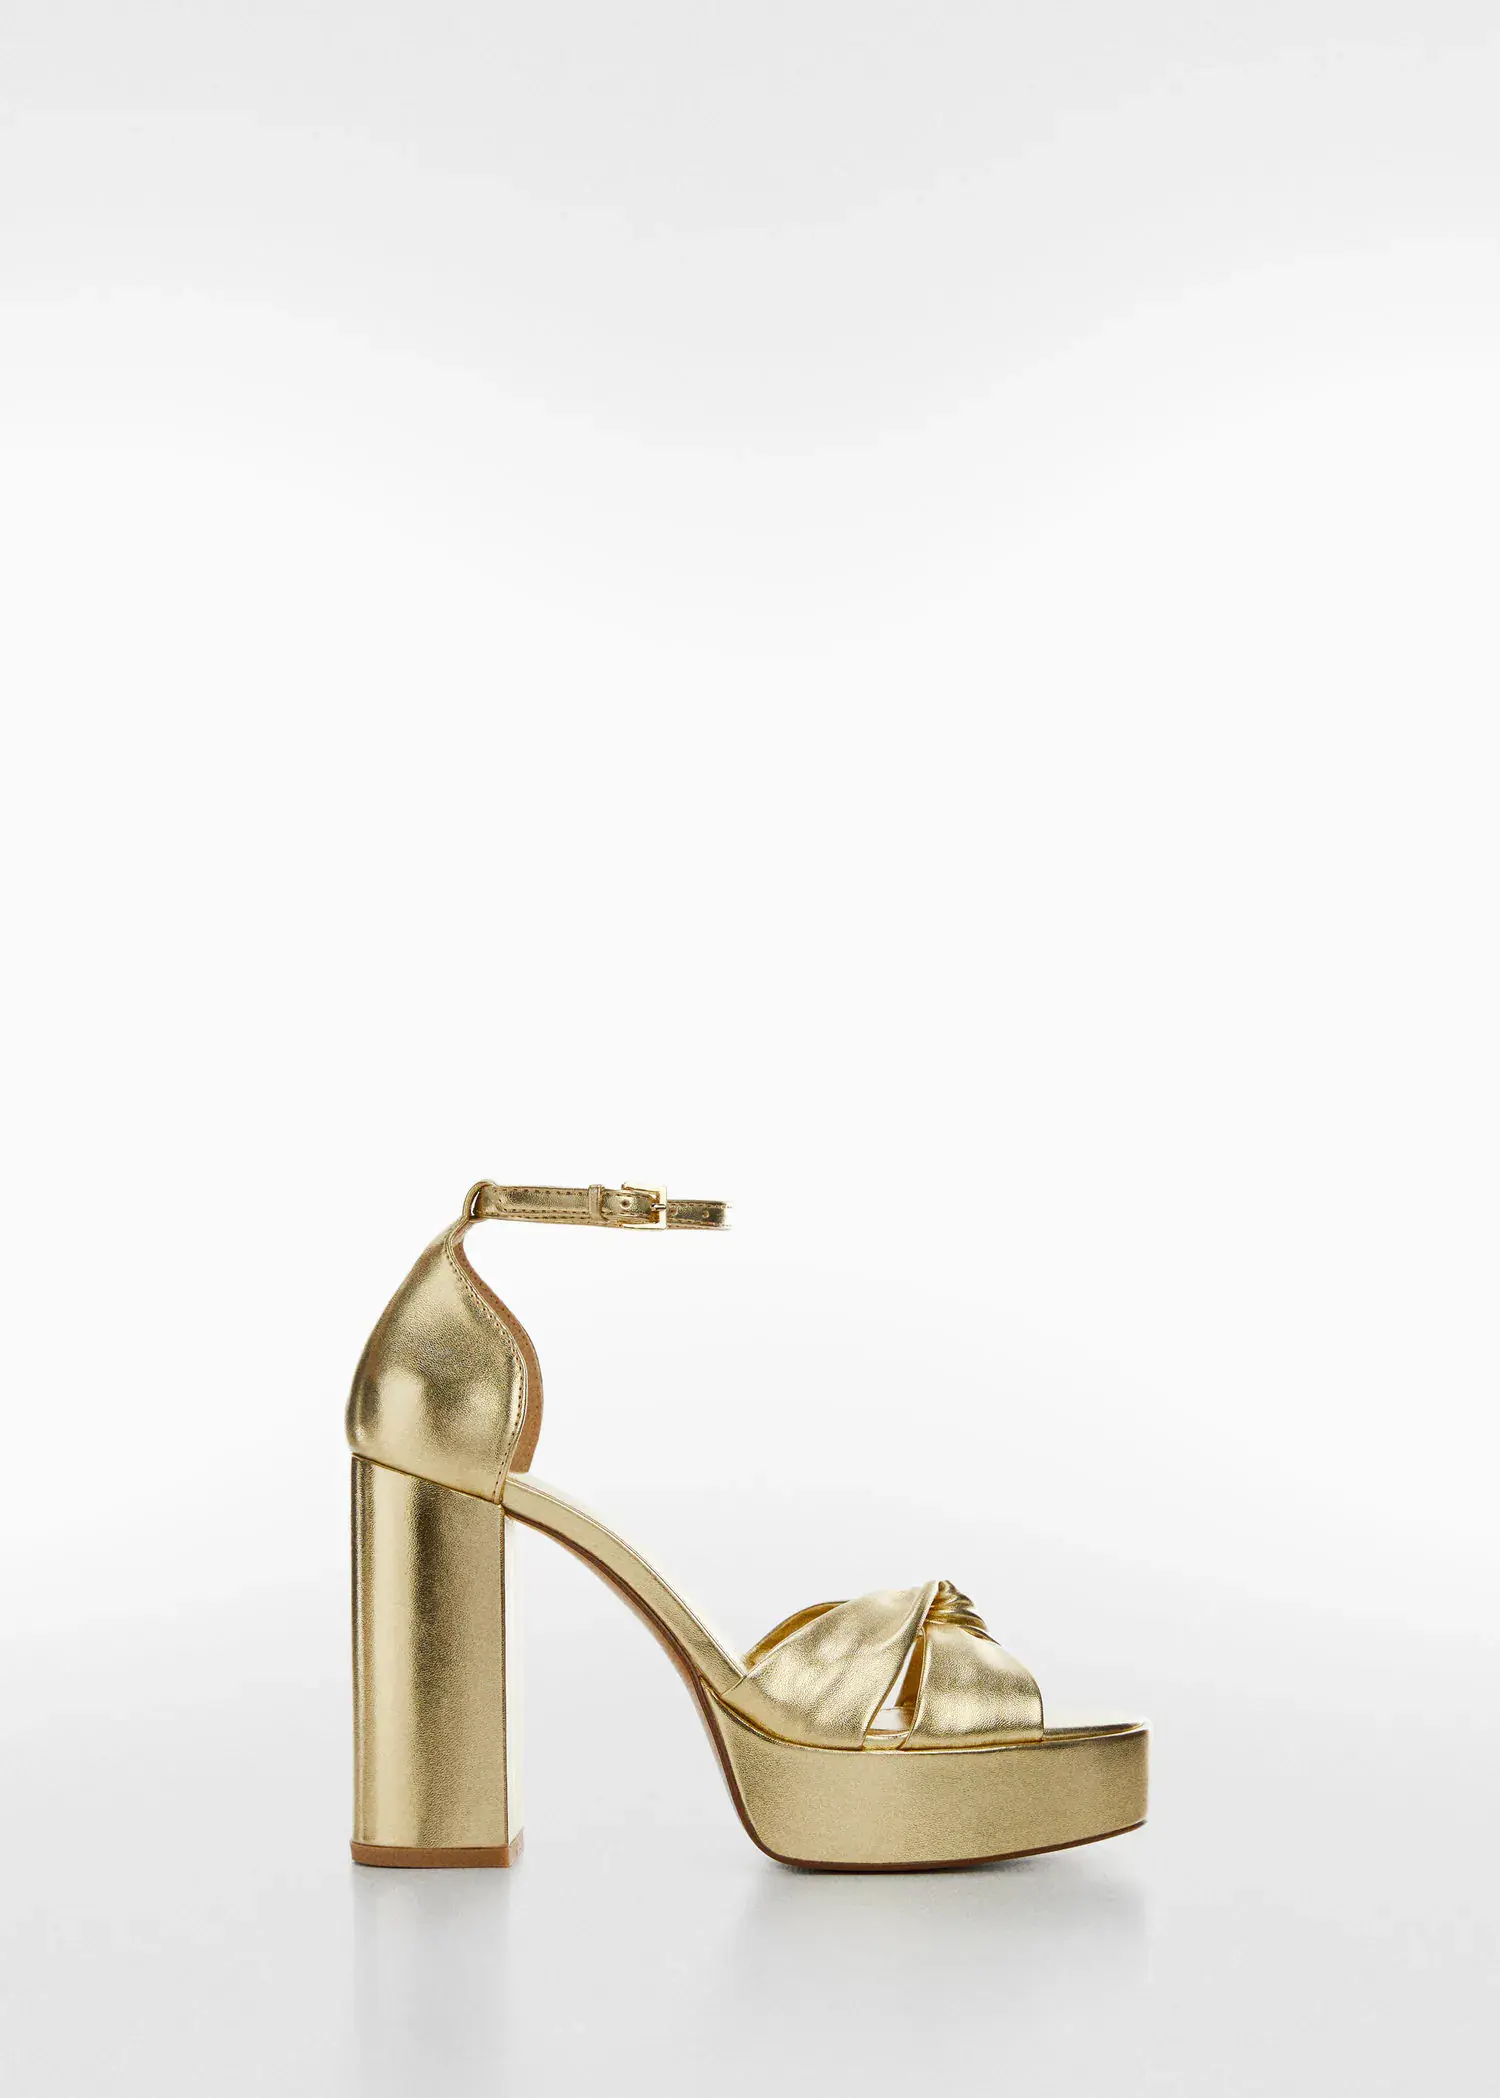 Mango Metallic heel sandals. a pair of gold high heeled shoes on a white background. 